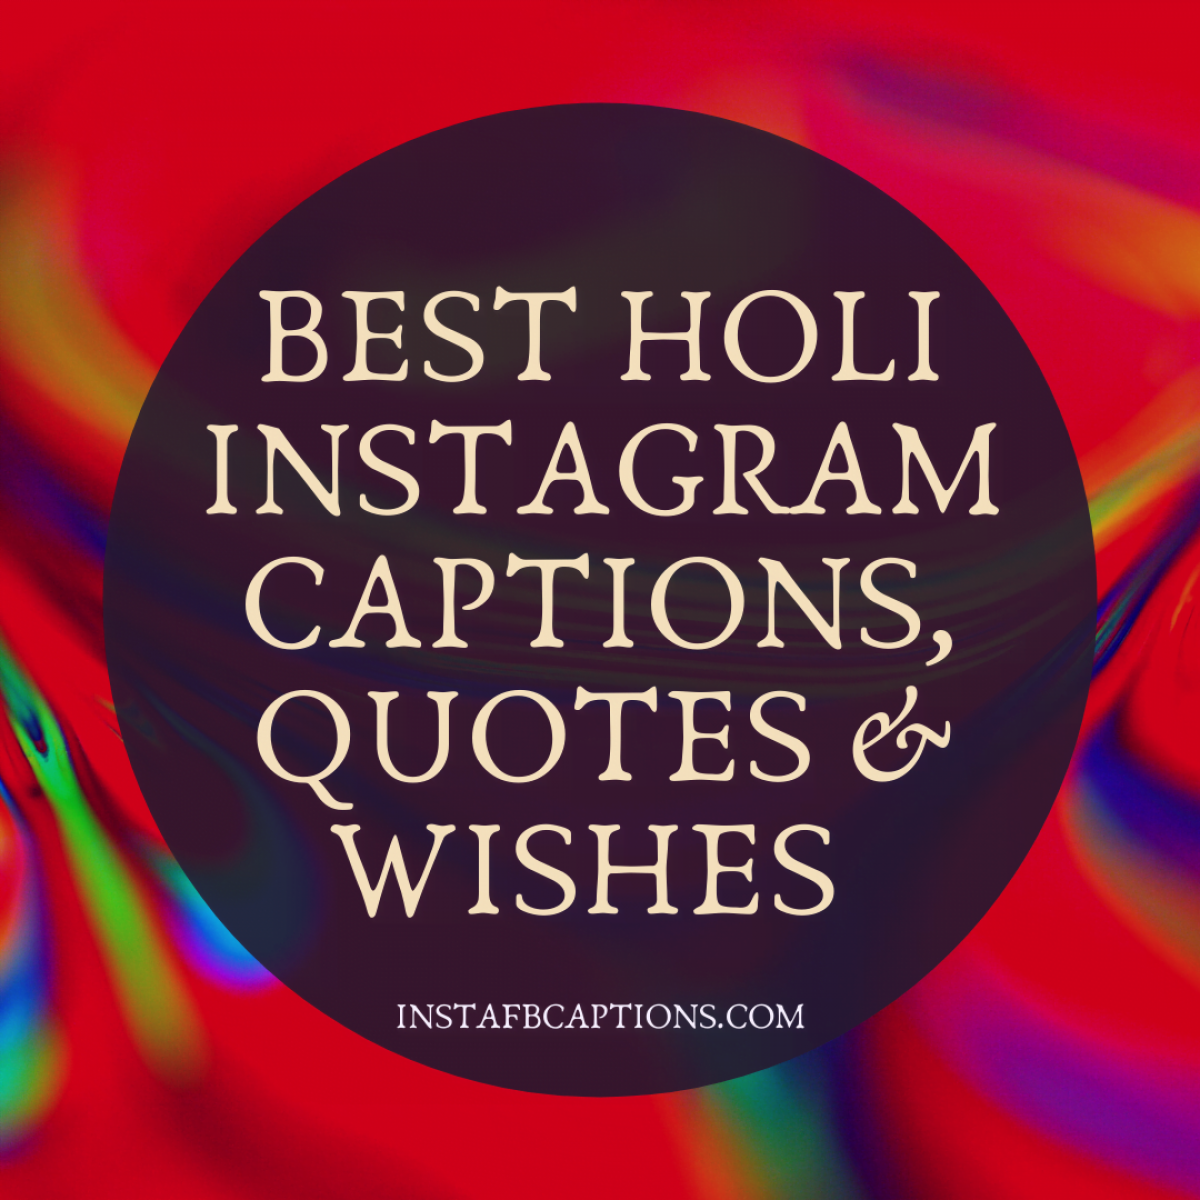 150+ Colourful Holi Captions, Quotes, and Wishes to Spread Love - IFC